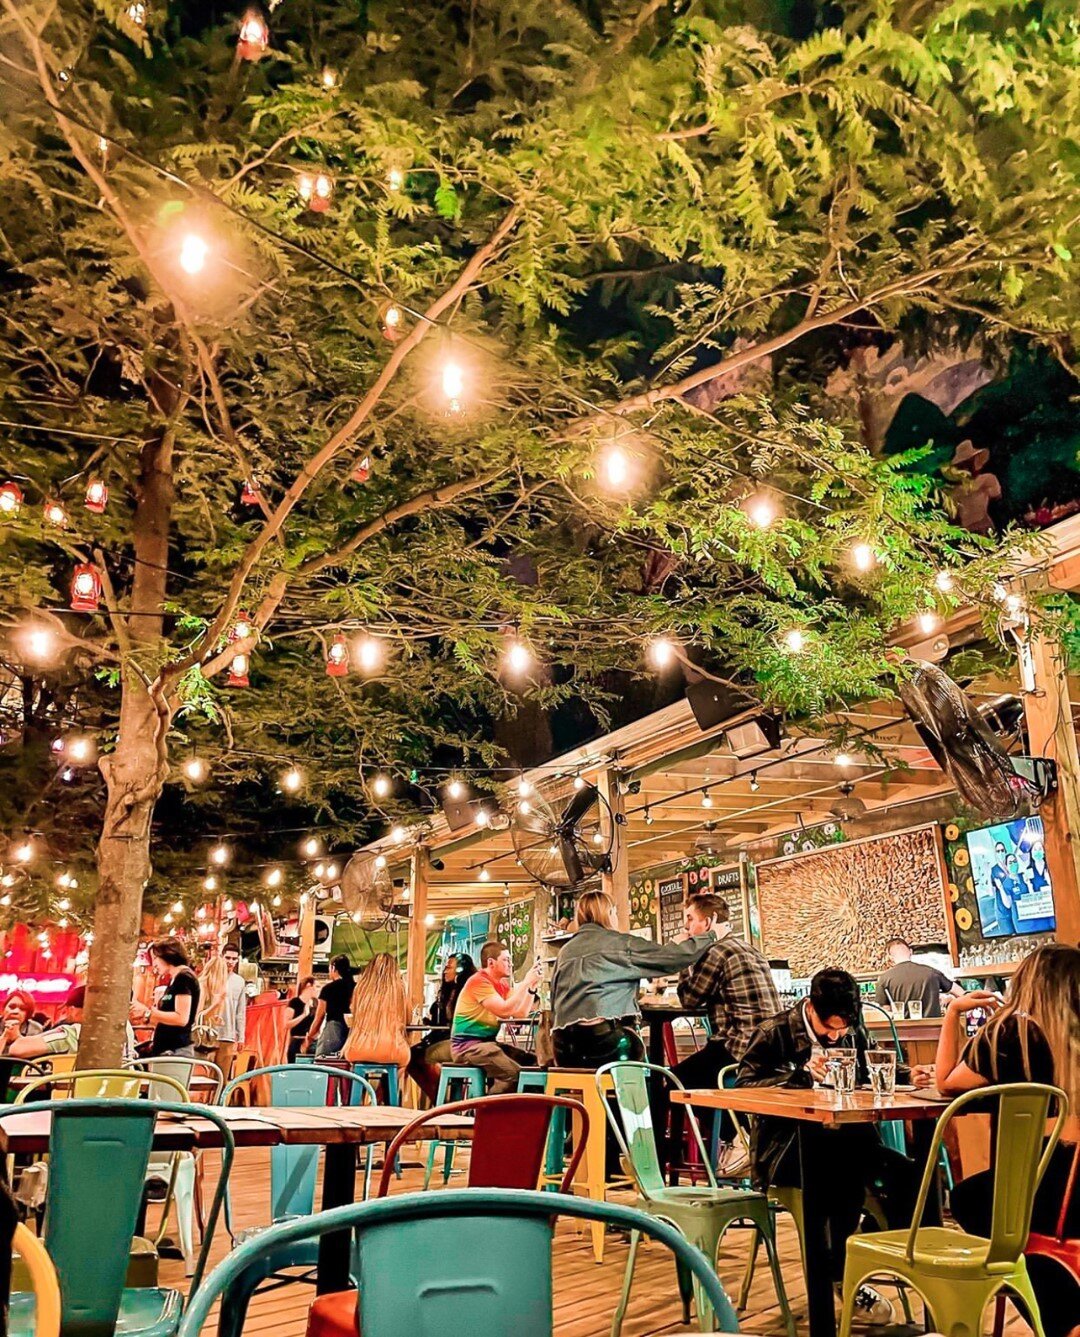 A beautiful night deserves a meal at our beautiful location 😍 
Book your reservations now!
@prachiloke 📸 
#junophilly #phillytacos #phillyphilly #phillydrinks #phillyeats #phillylove #phillymargs #phillycocktails #phillytakeout #phillyfun #discover